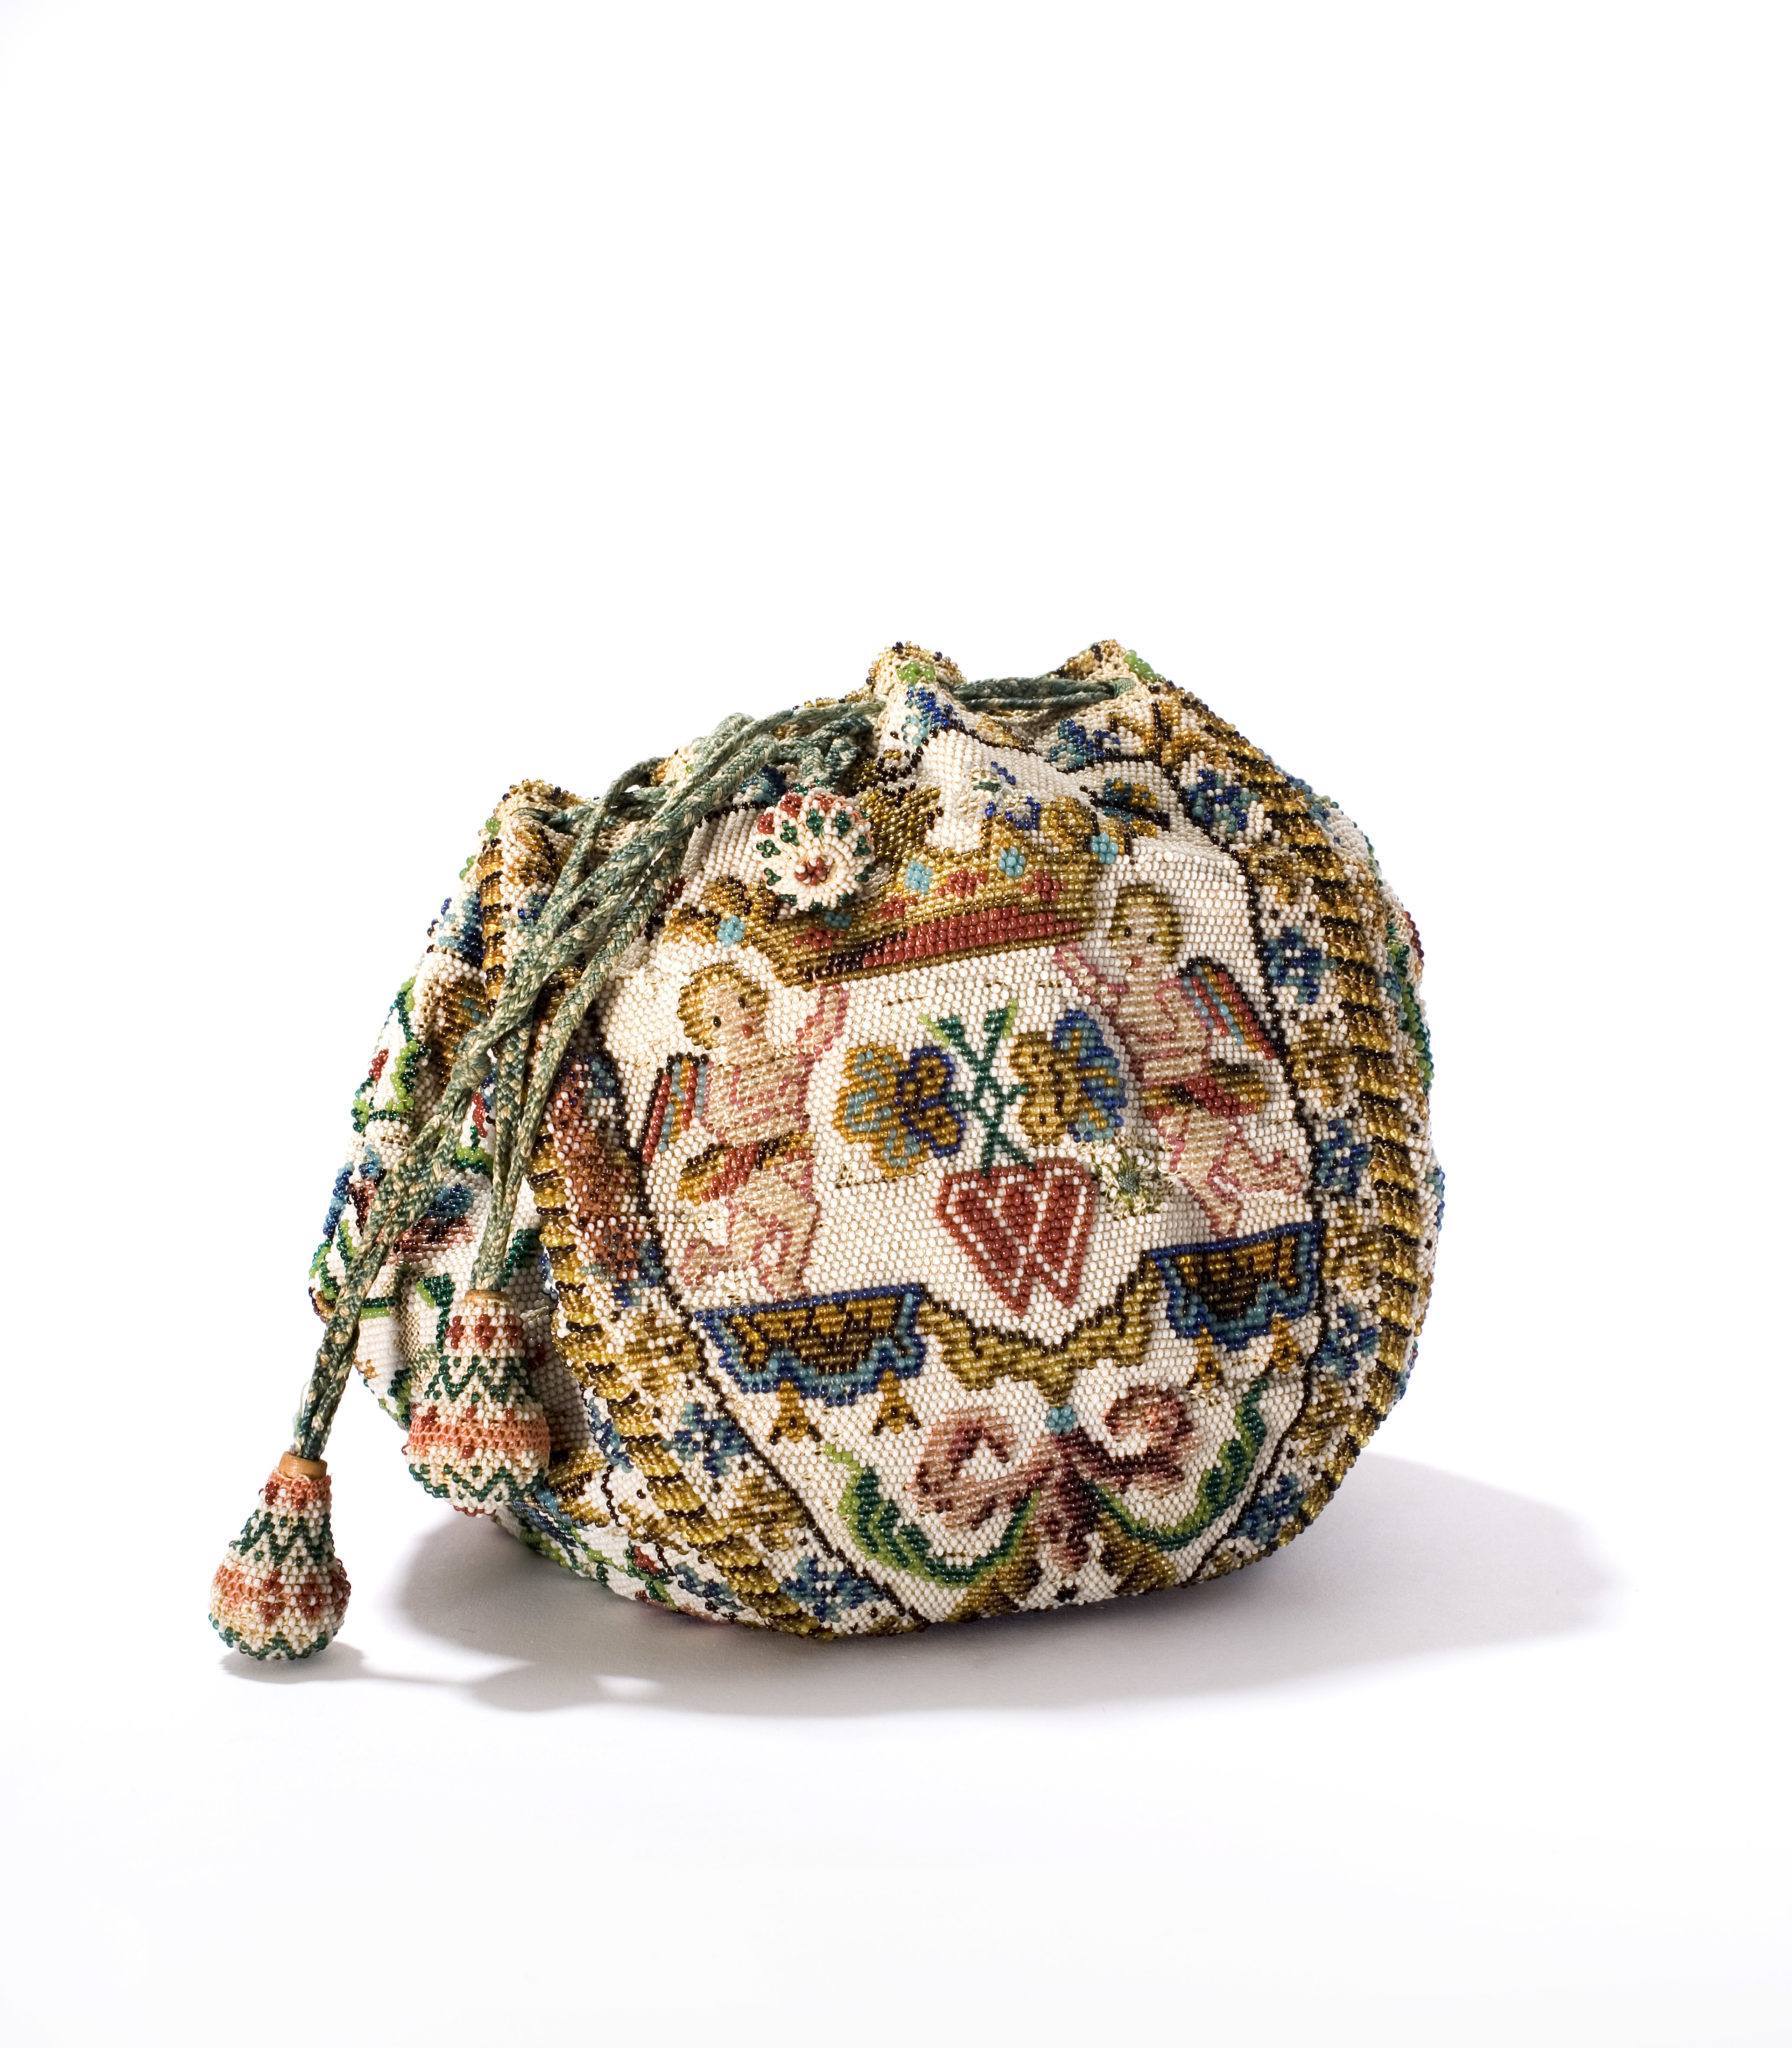 One of the beautiful 18th century glass bead bags on display 